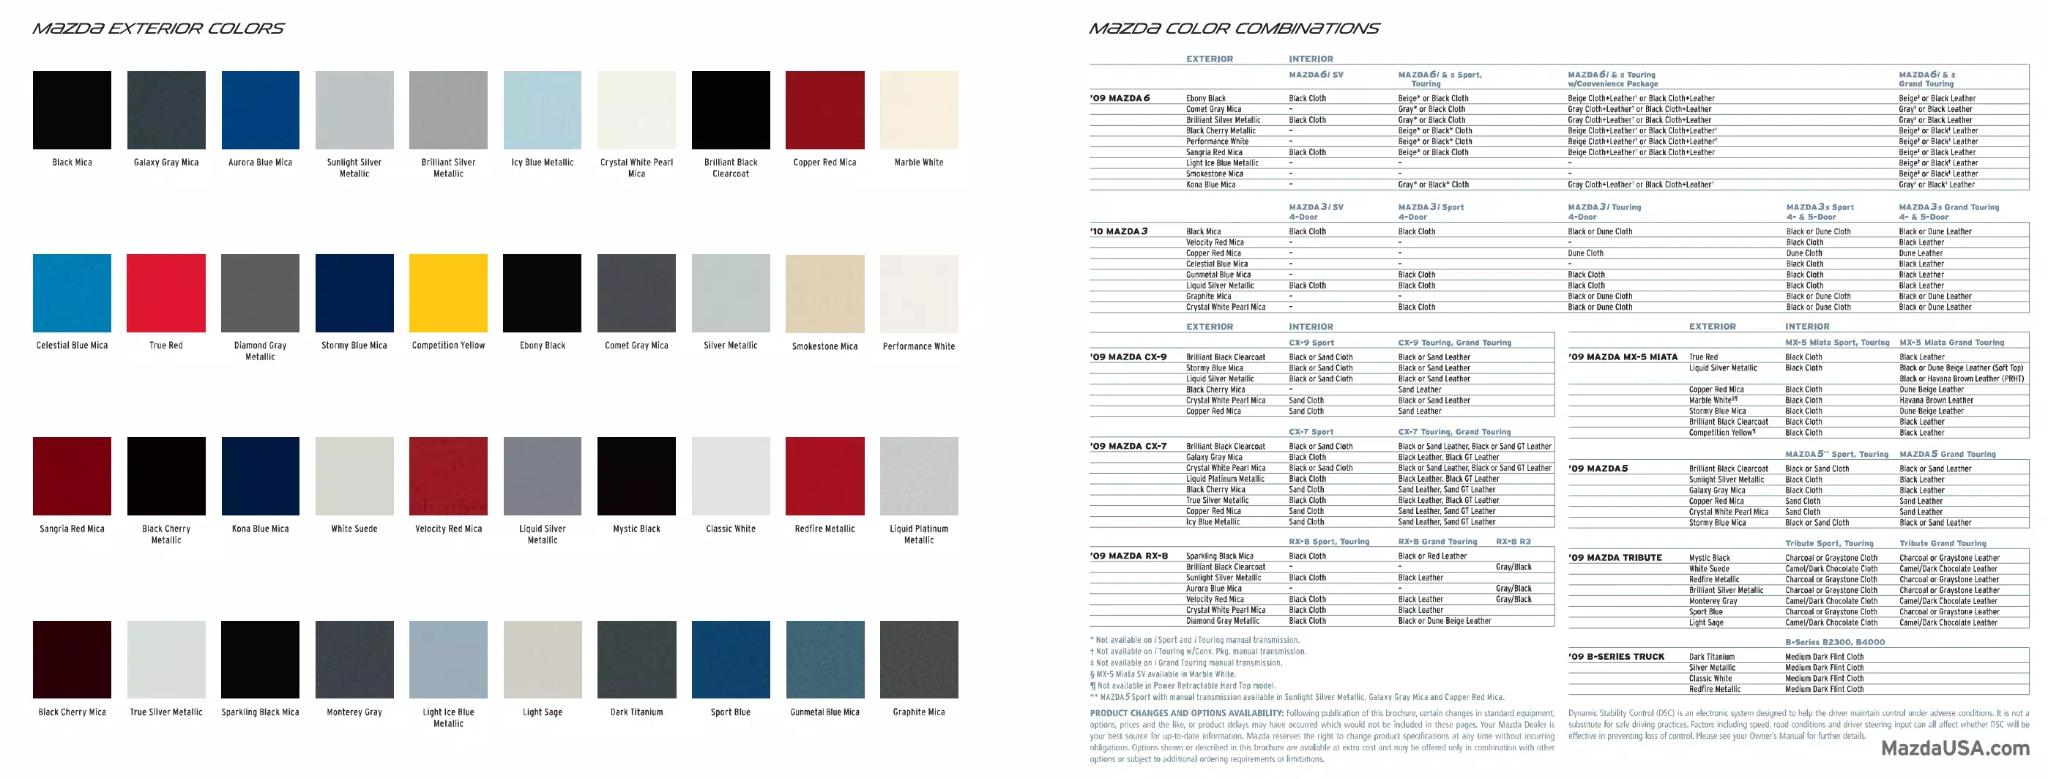 mazda exterior color shades for all vehicles.